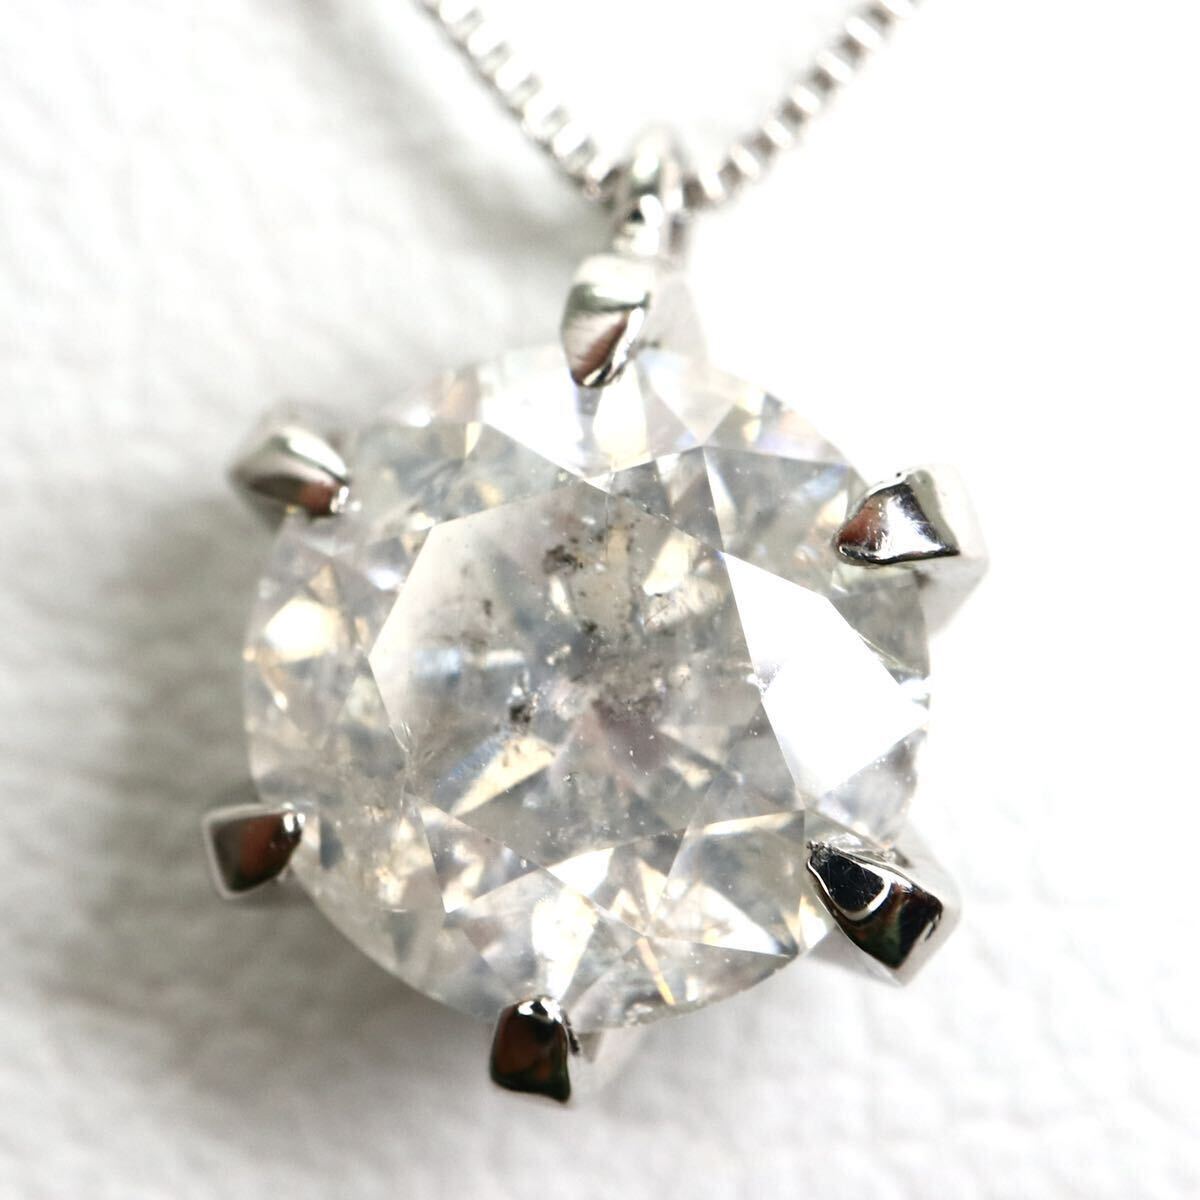 1ct UP!!《Pt850/Pt900天然ダイヤモンドネックレス》M 約2.0g 約44.5cm 1.20ct diamond necklace ジュエリー jewelry EE7/ZZの画像5